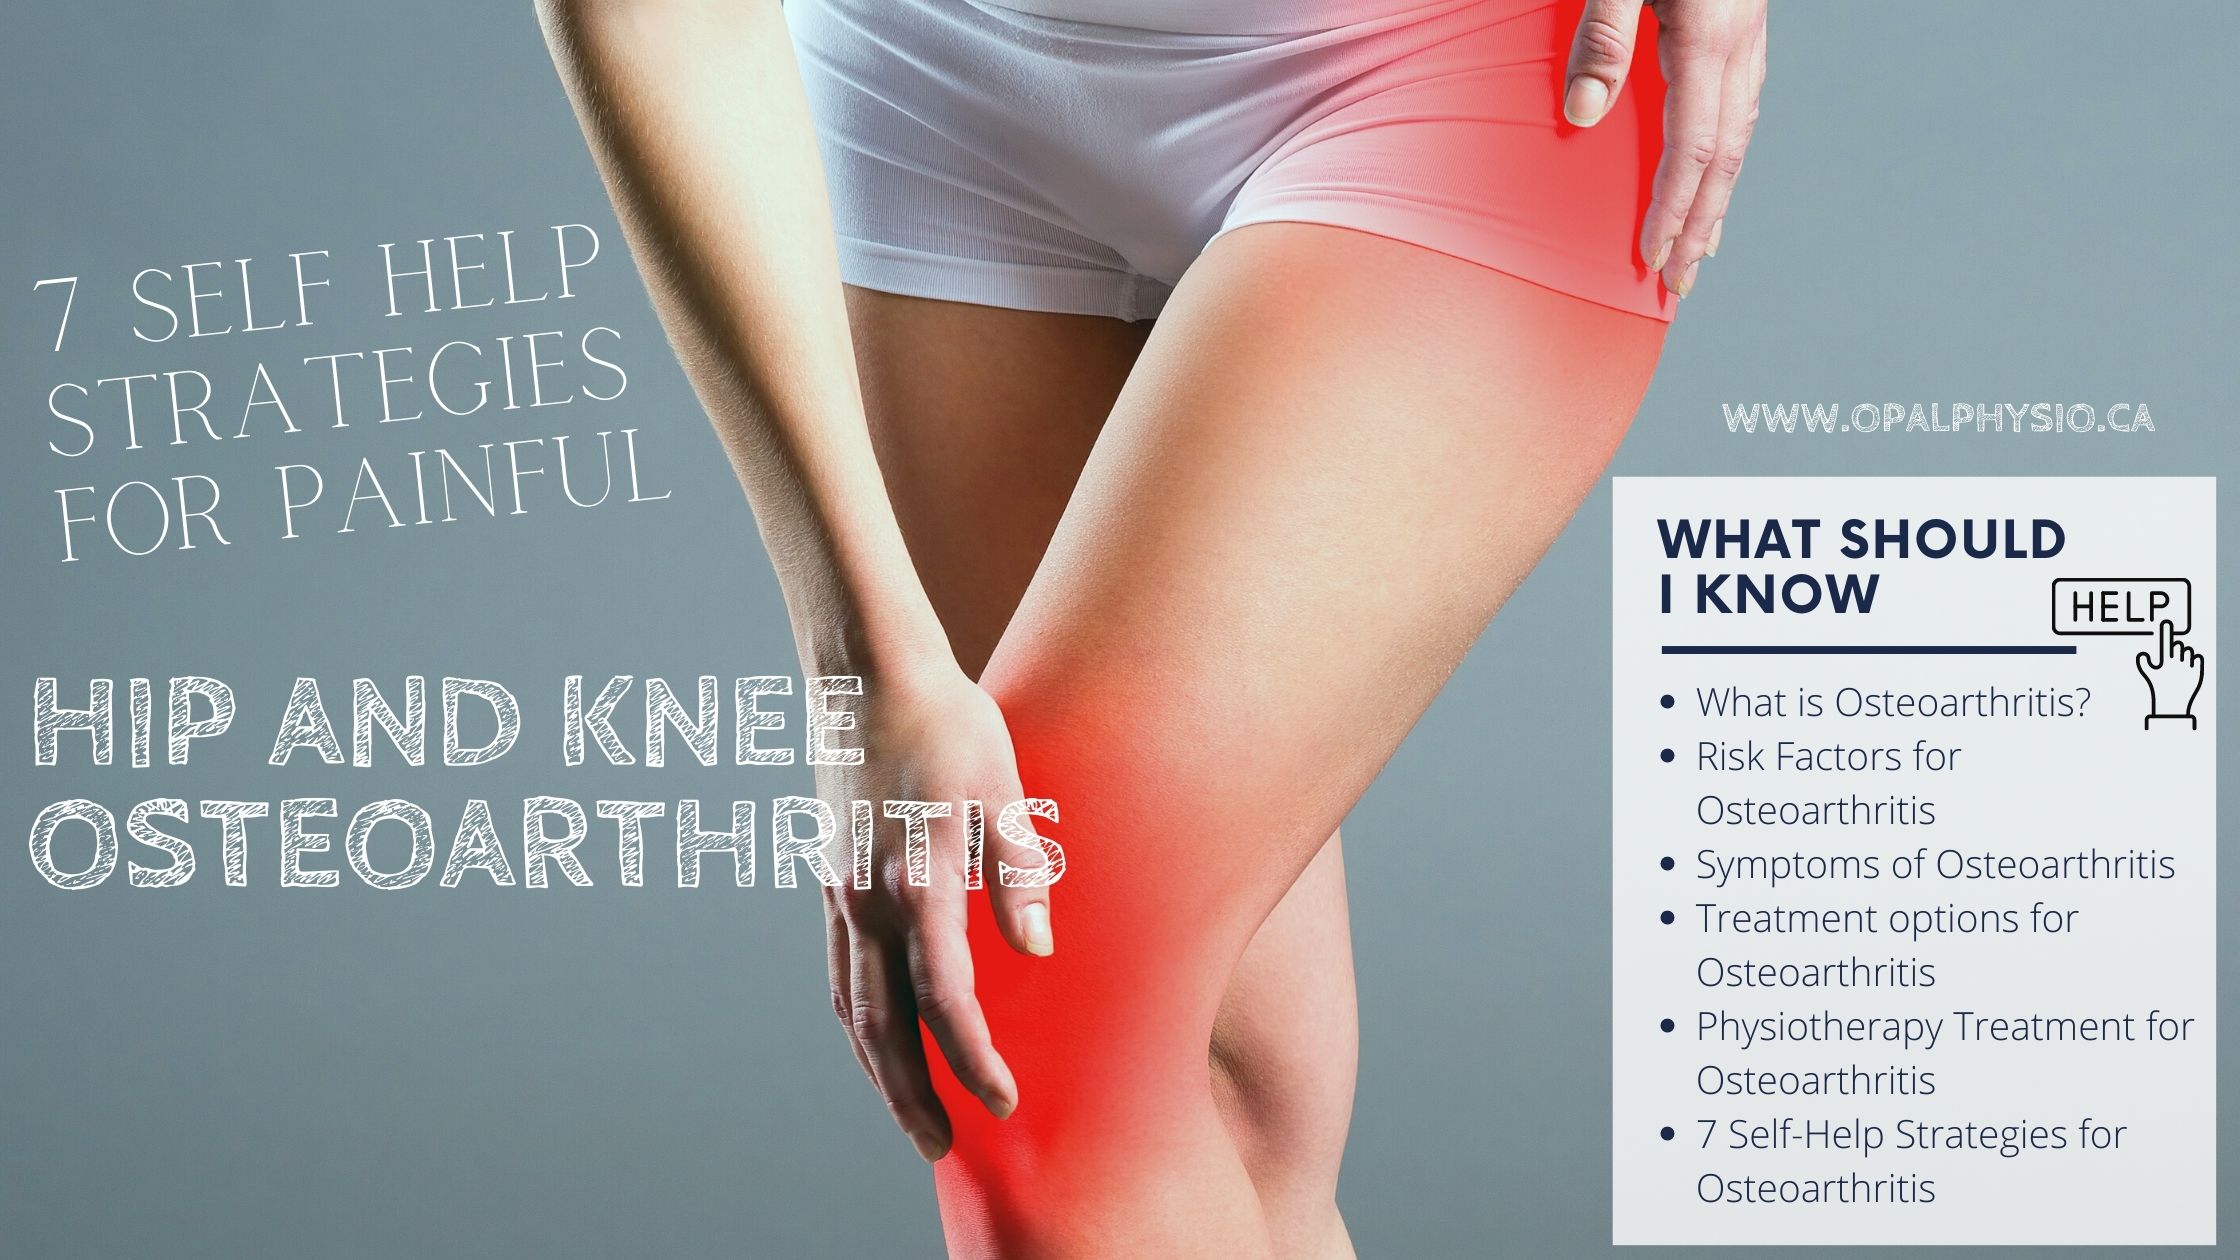 7 Self Help strategies for Painful Hip and Knee Osteoarthritis